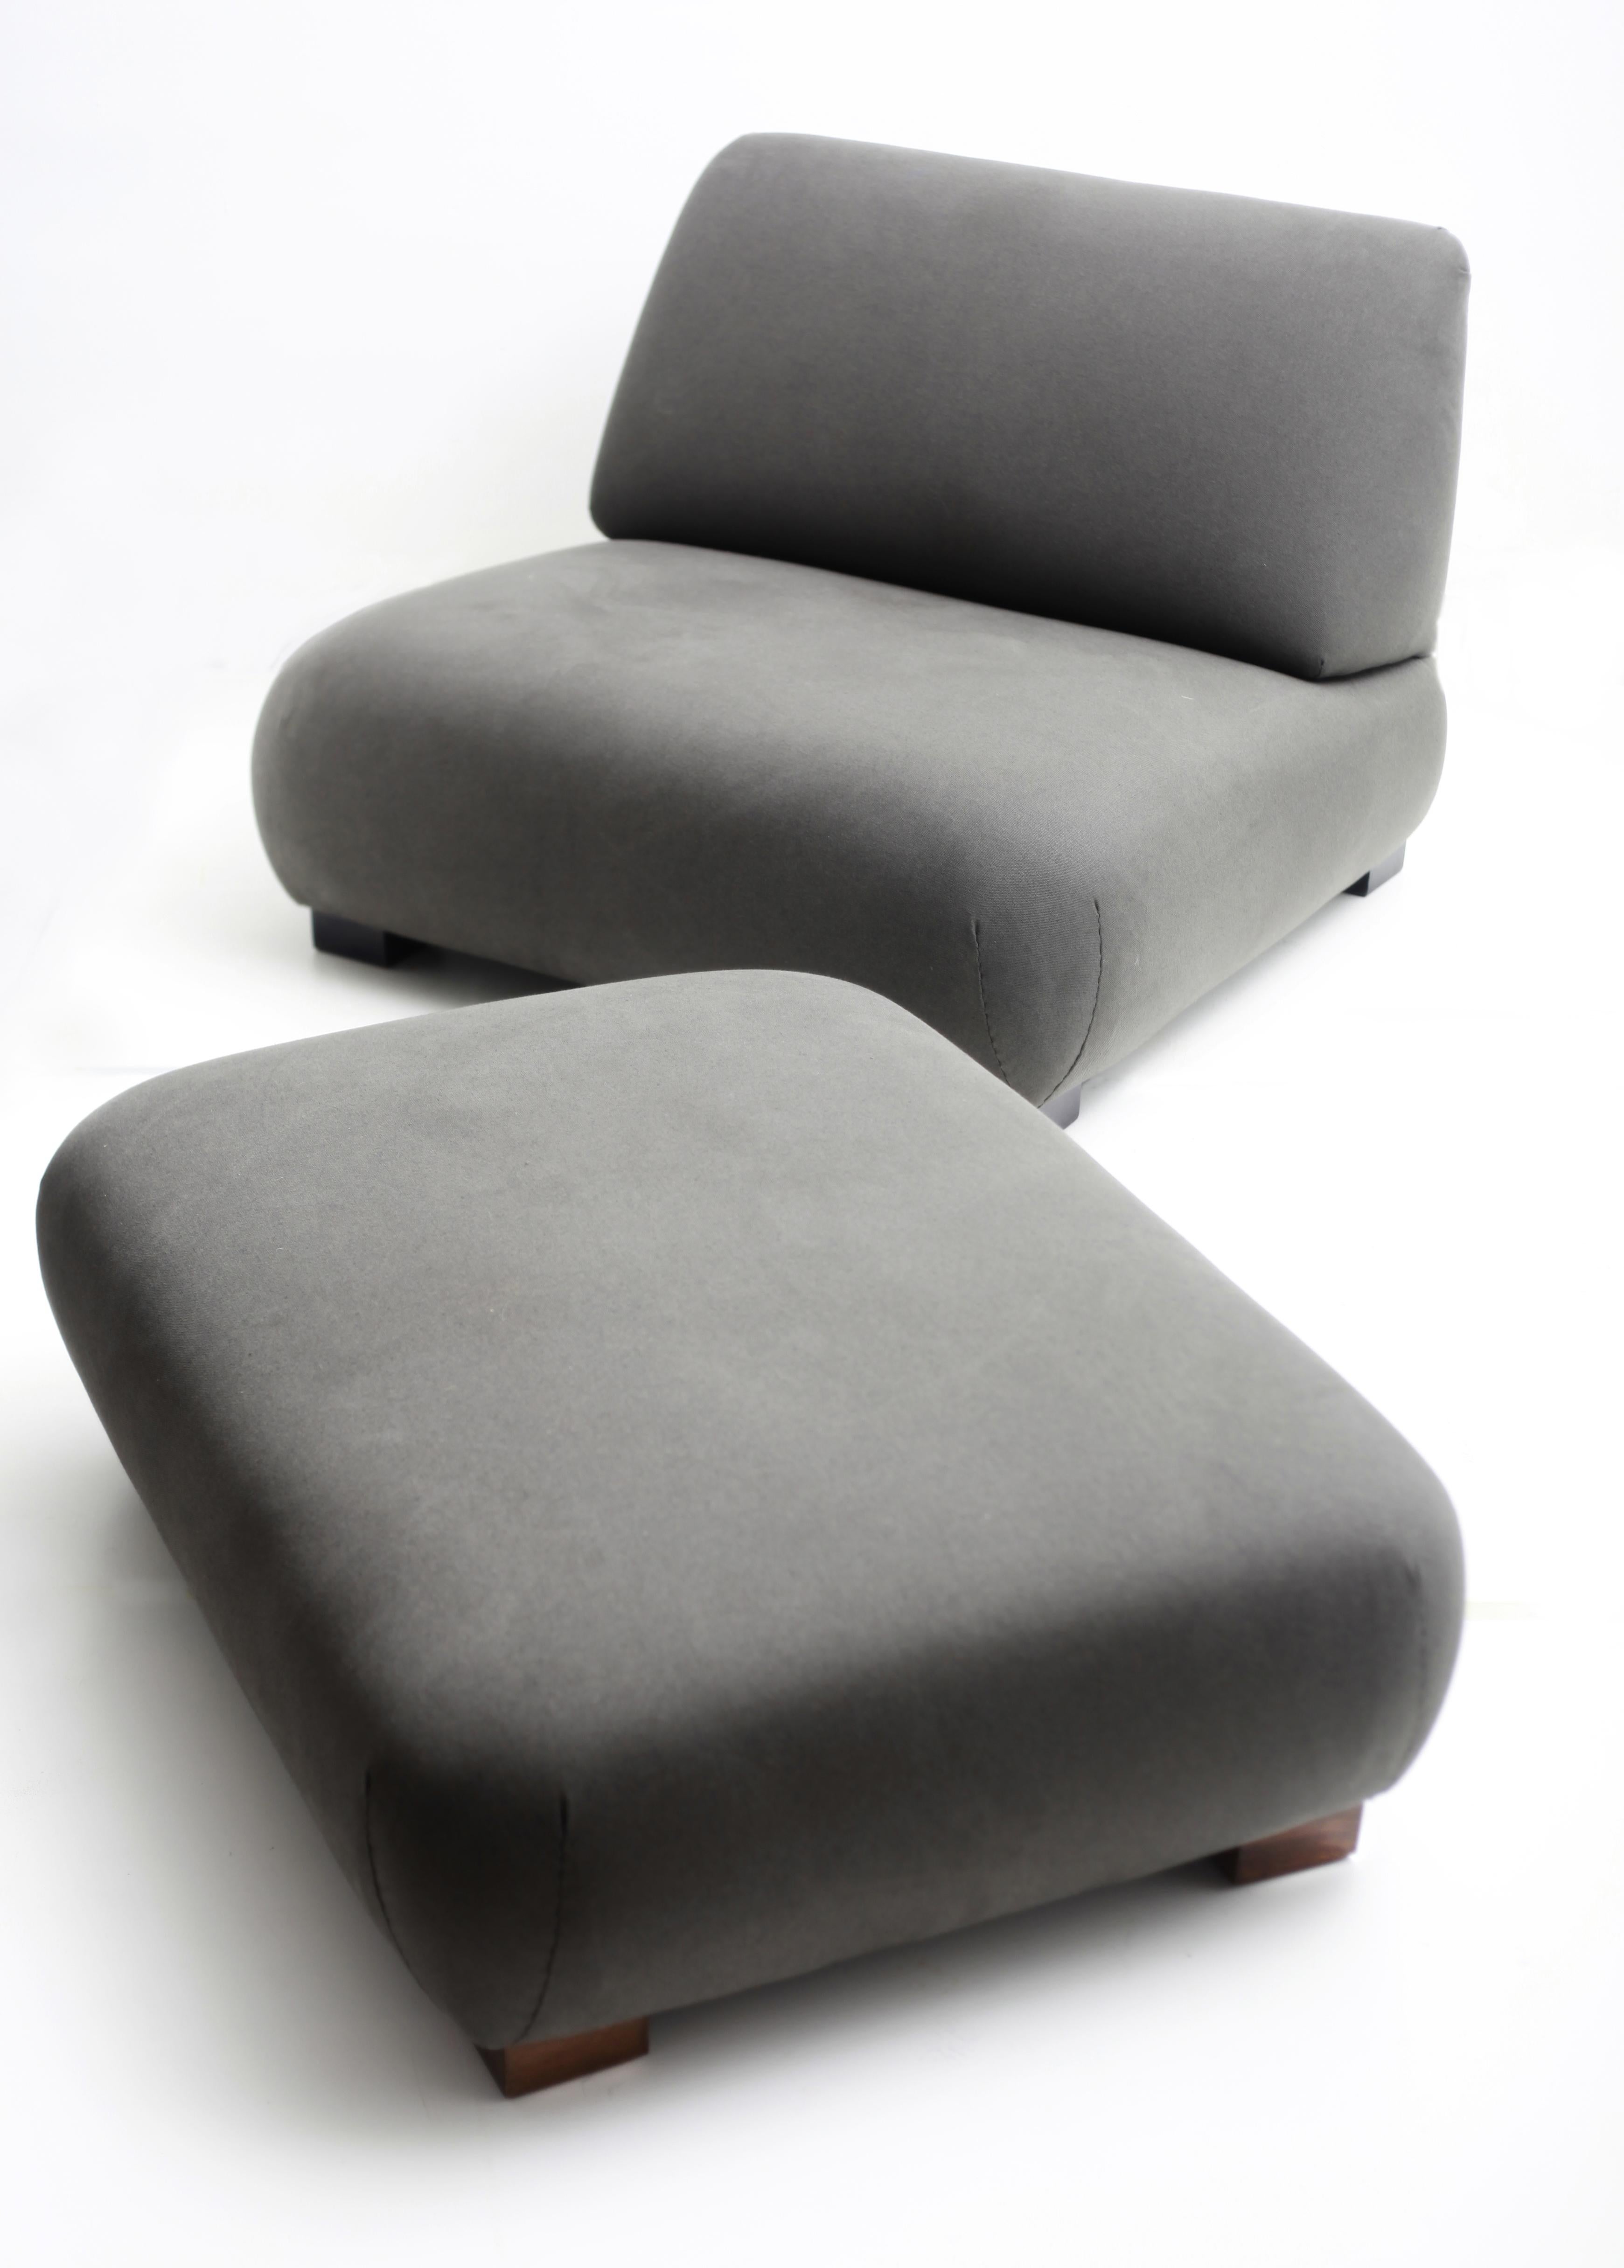 Cadaqués ottoman by Federico Correa, Alfonso Milá
Dimensions: D 75 x W 100 x H 34 cm
Materials: beech wood, fabric.
Available in other fabrics.

The Cadaqués ensemble sums up an entire philosophy of good living in the form of a sofa, lounge